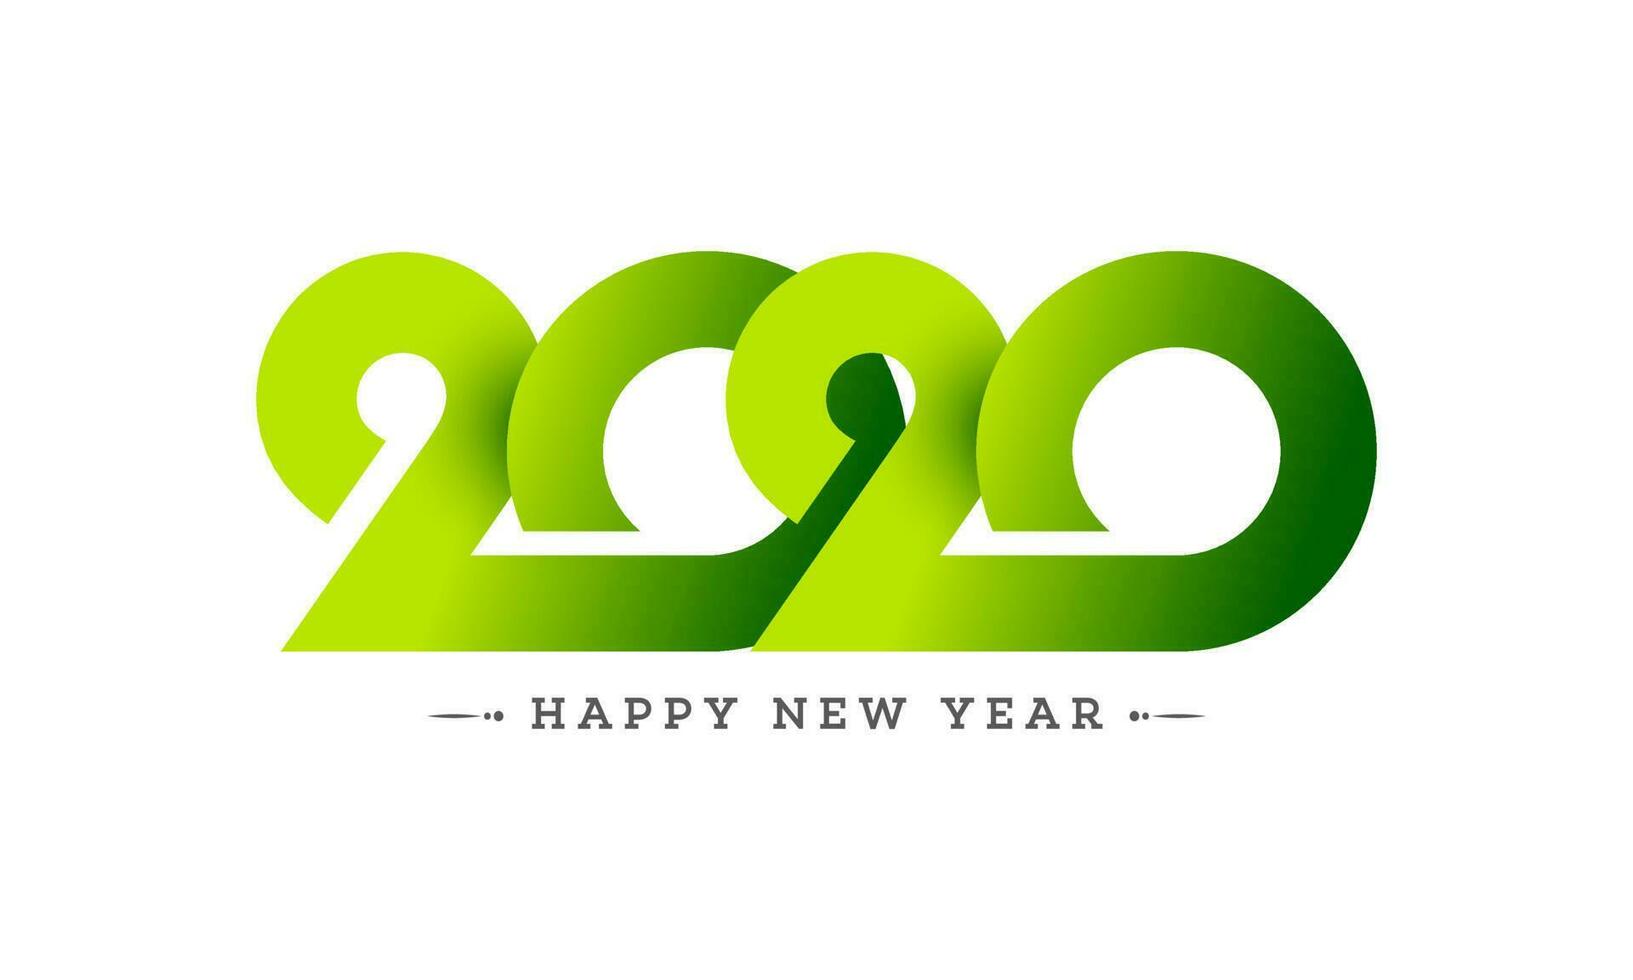 Green text 2020 in paper cut style on white background for Happy New Year celebration greeting card design. vector